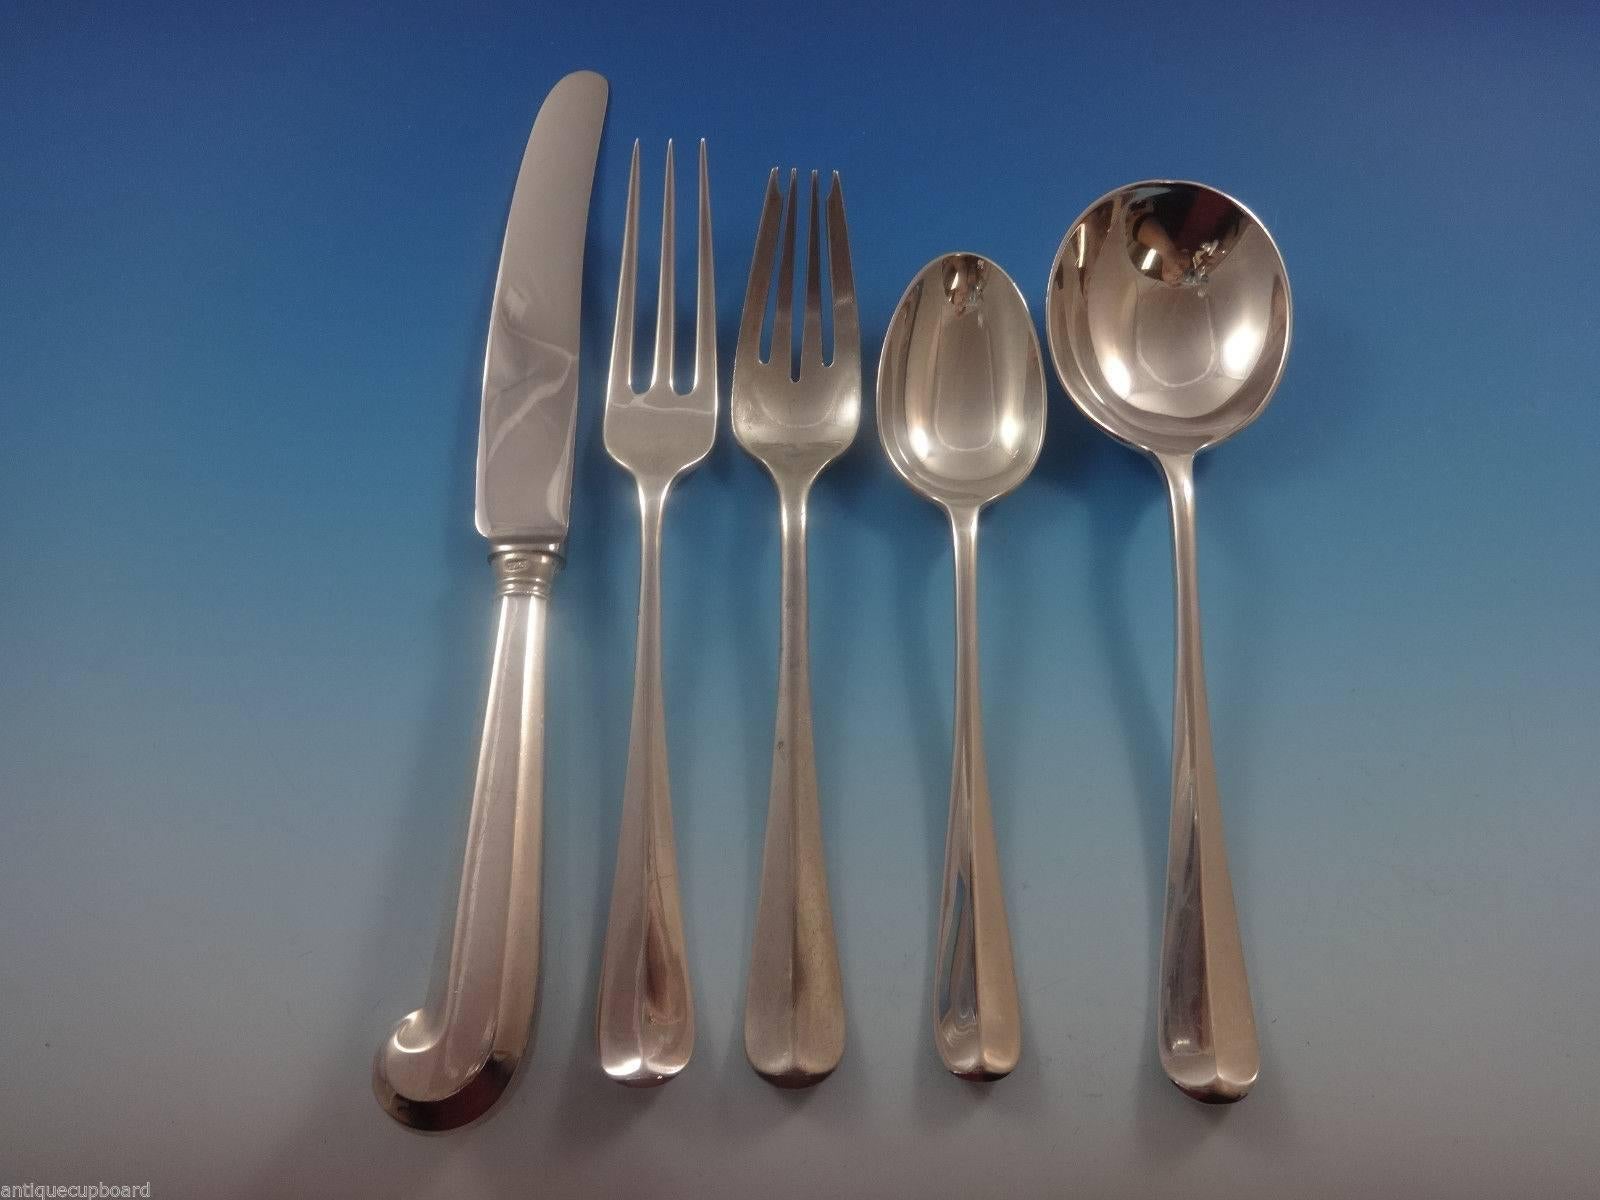 RAT TAIL by TIFFANY & CO. sterling silver Flatware set - 33 pieces. GREAT STARTER SET! This set includes:

6 KNIVES, 8 1/2